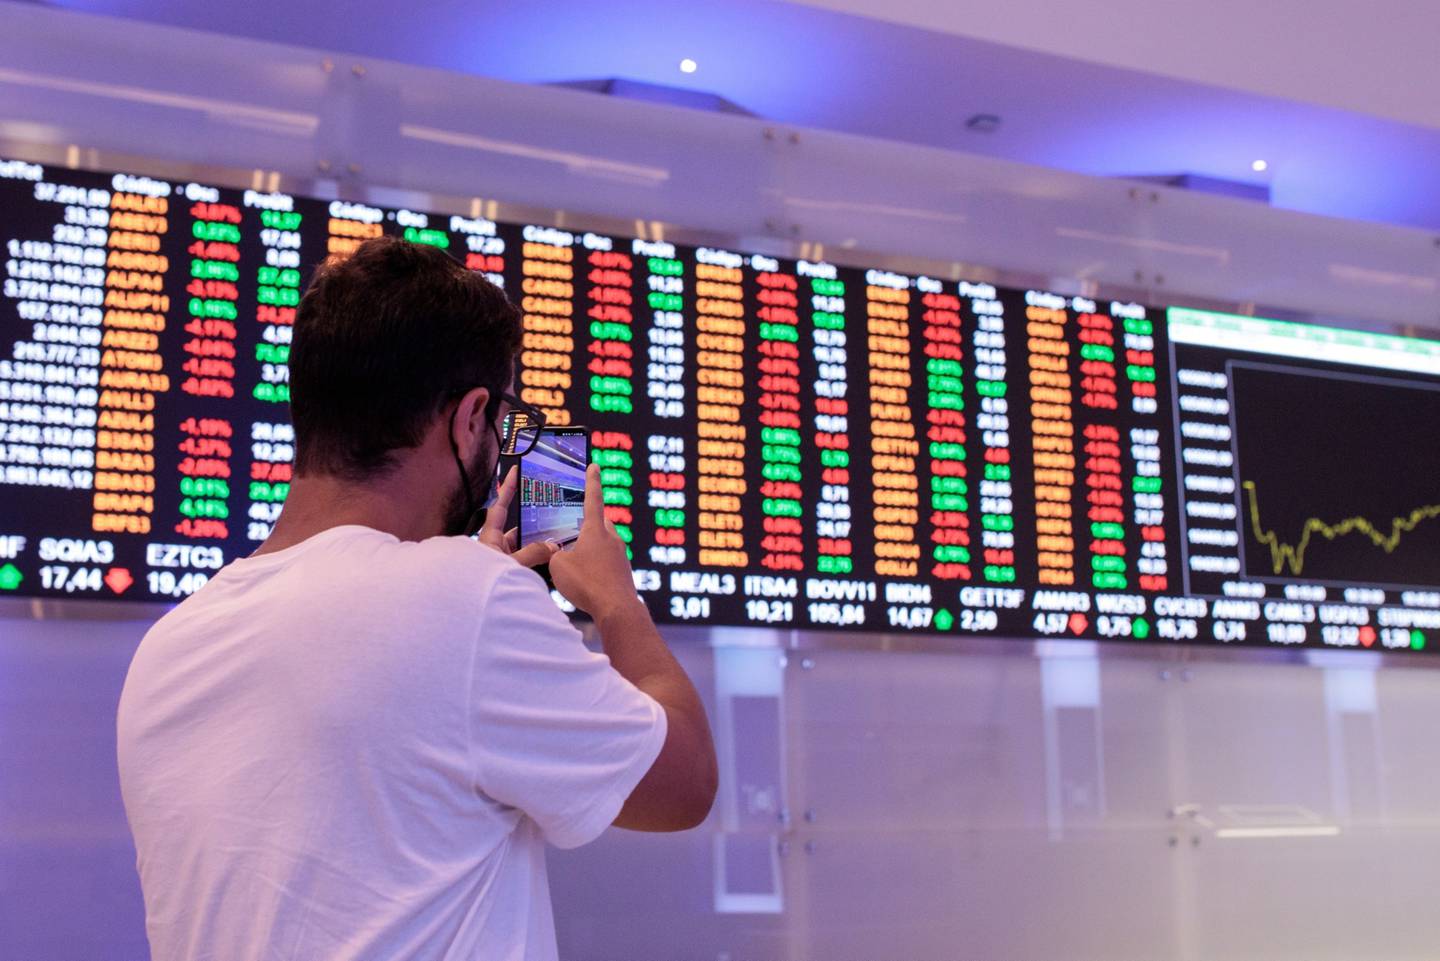 A visitor takes a photograph of an electronic board displaying stock activity at the Brasil Bolsa Balcao (B3) stock exchange in Sao Paulo, Brazil, on Monday, Nov. 8, 2021.